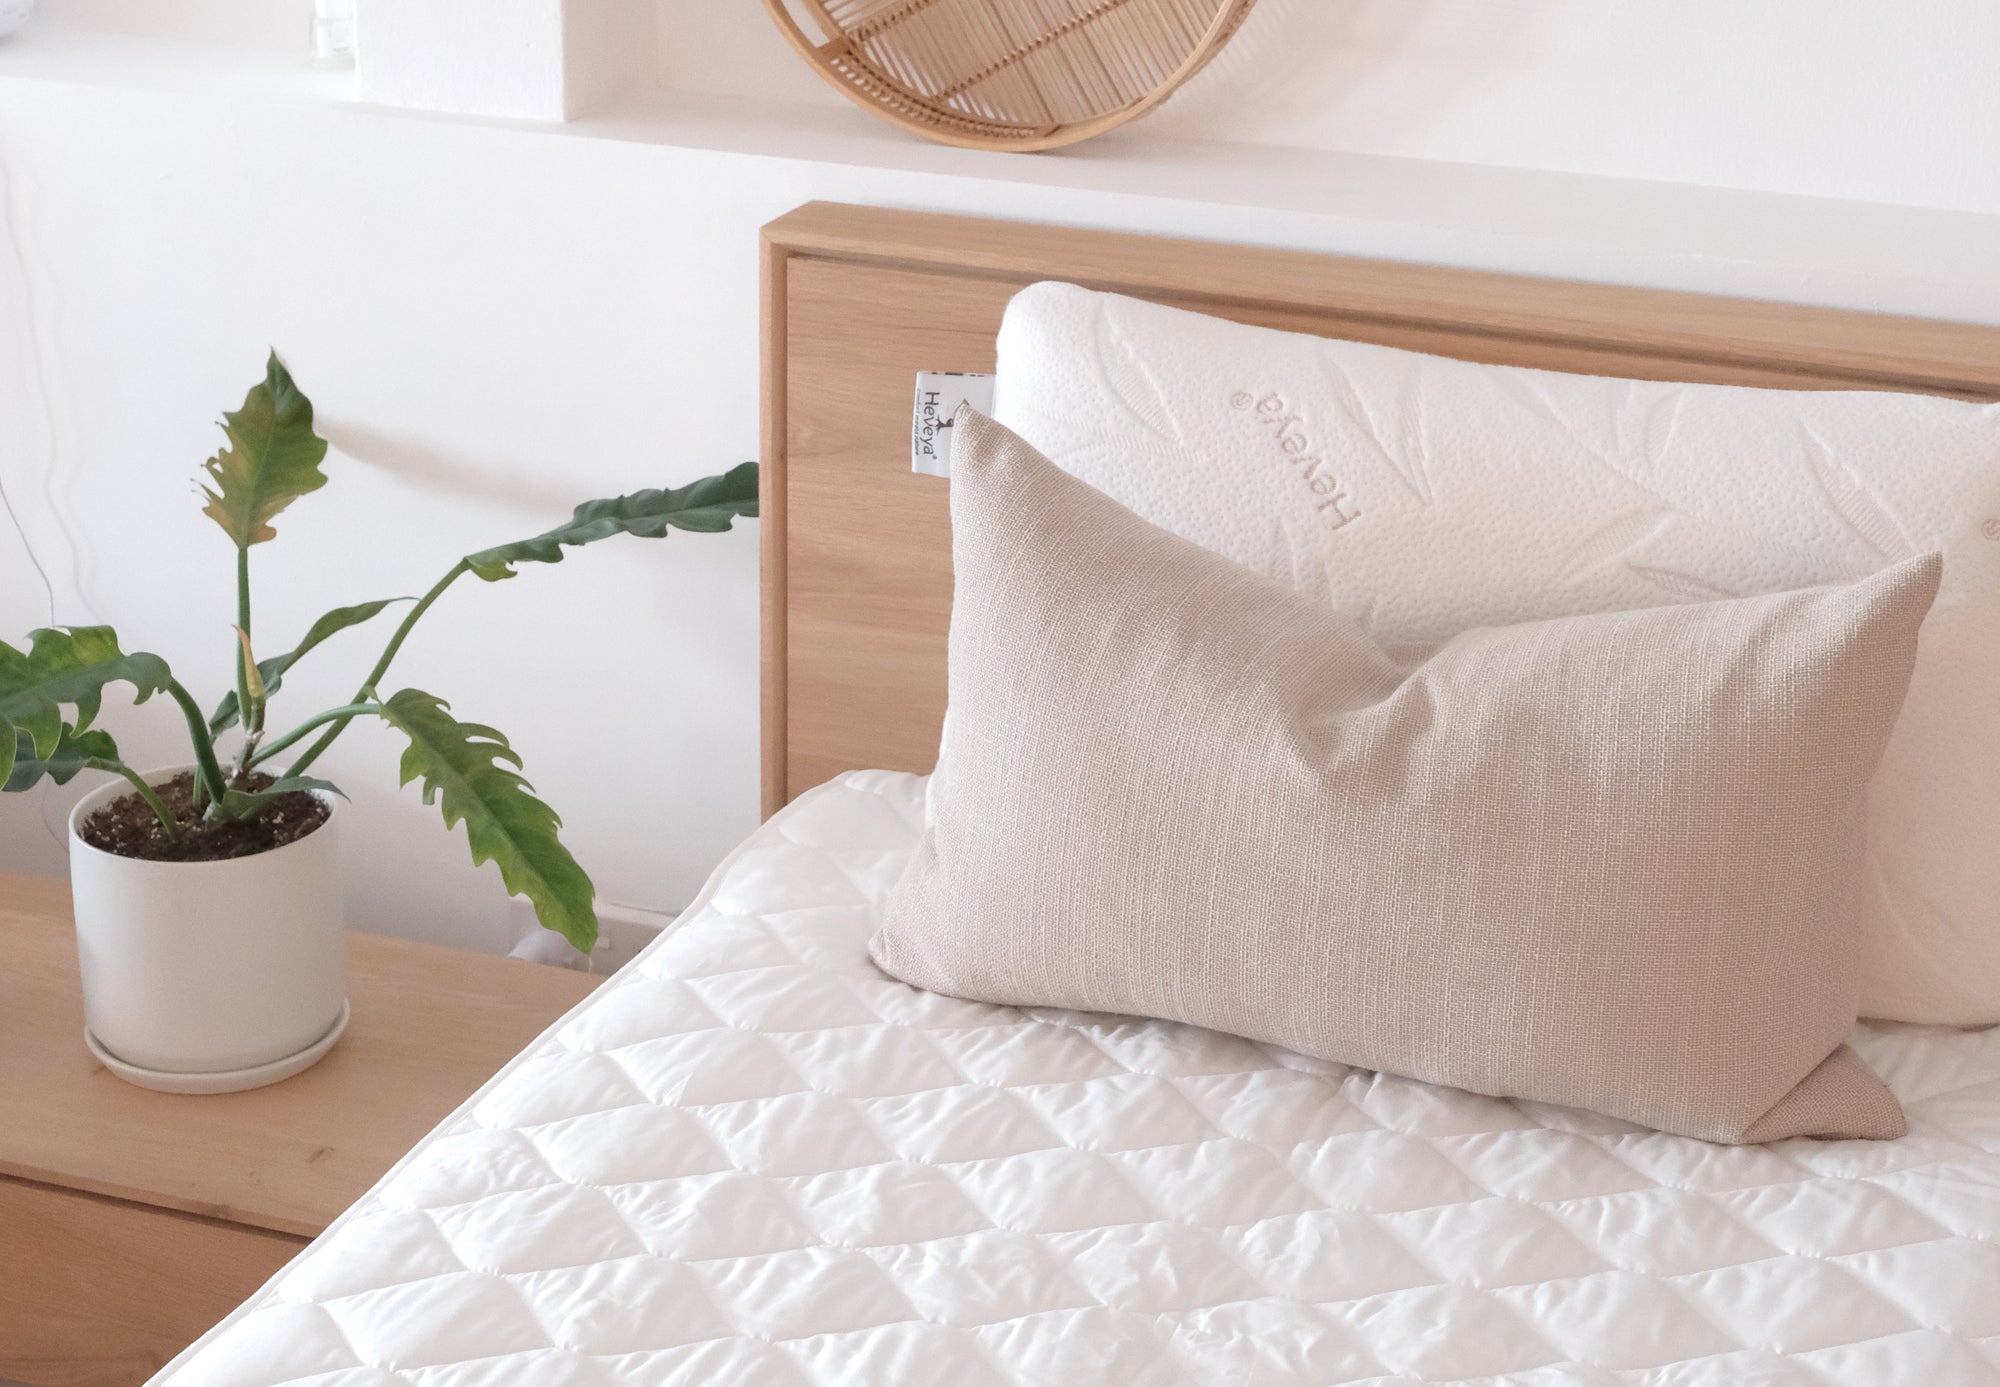 Is it necessary to have a mattress protector – Do you really need one?